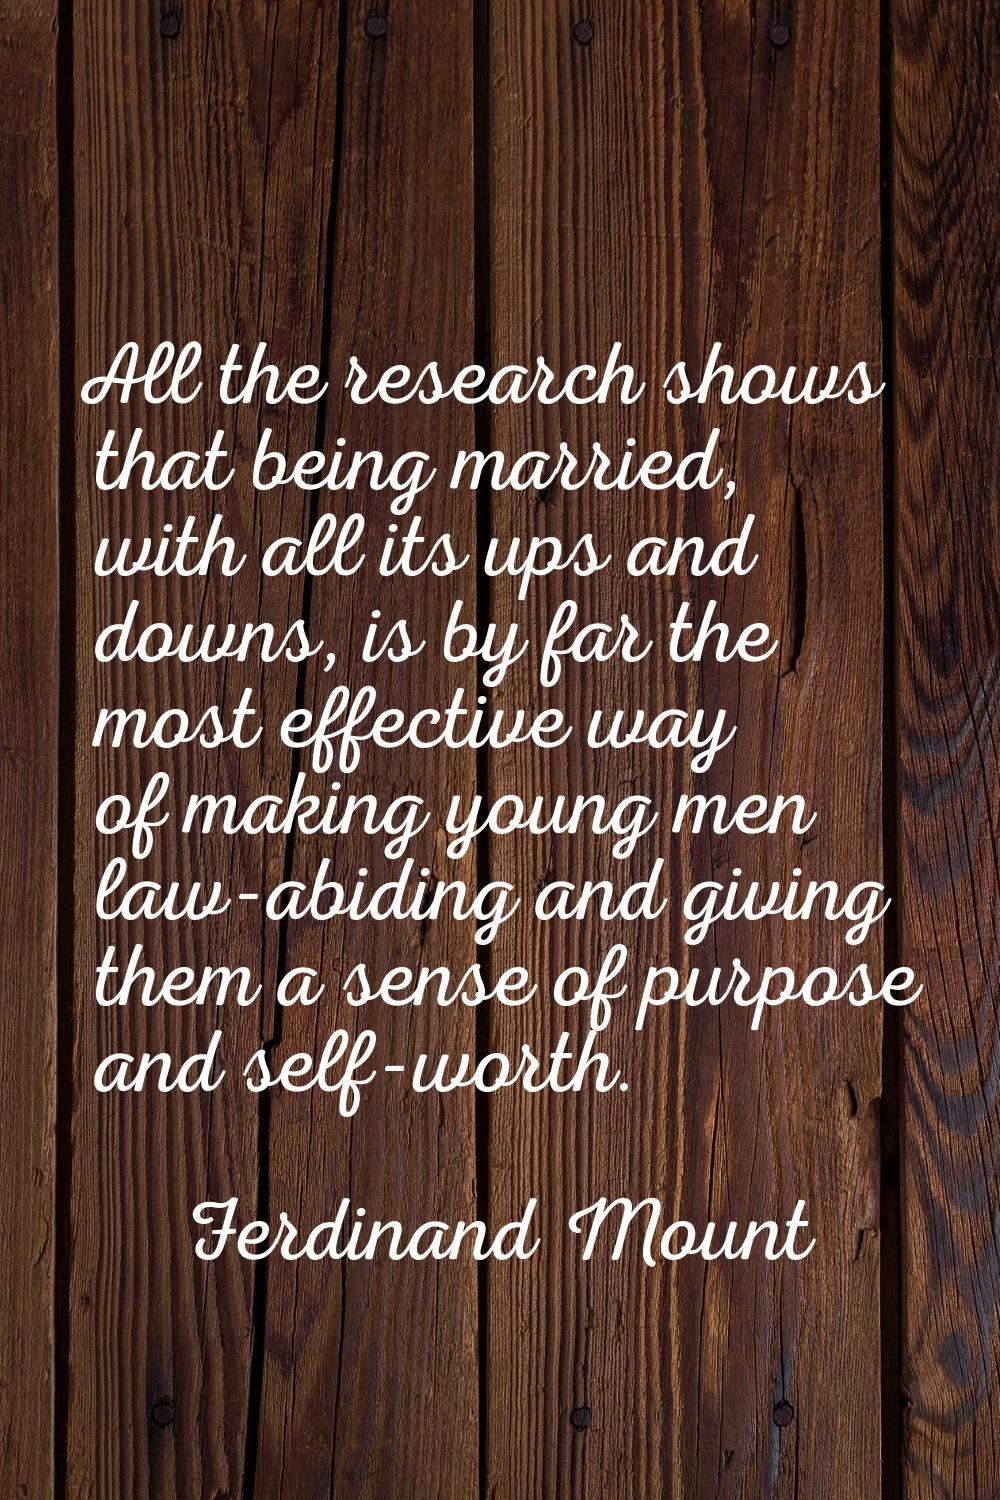 All the research shows that being married, with all its ups and downs, is by far the most effective